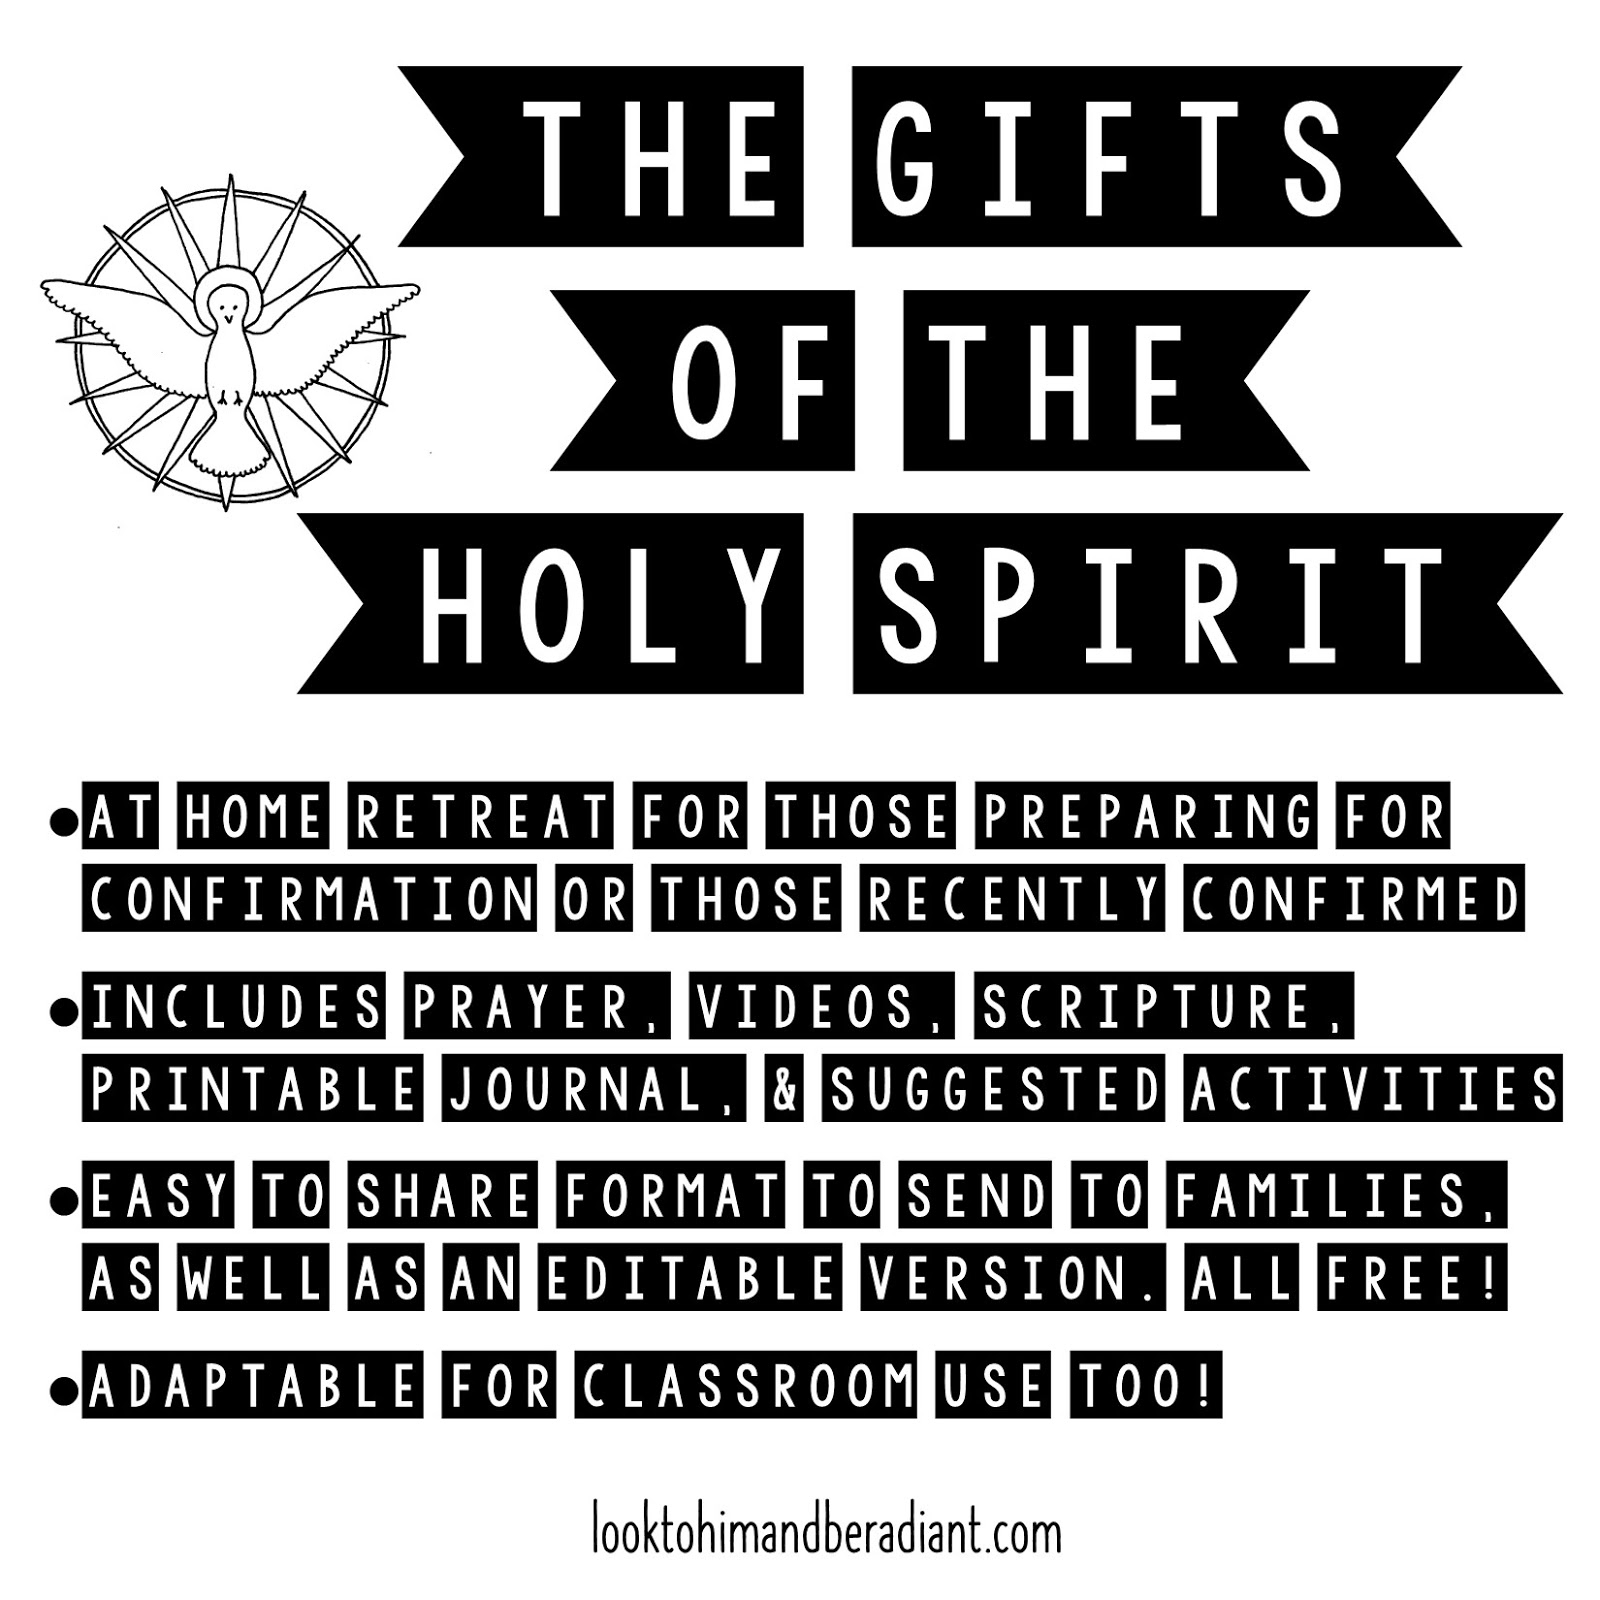 Look To Him And Be Radiant Gifts Of The Holy Spirit At Home Retreat